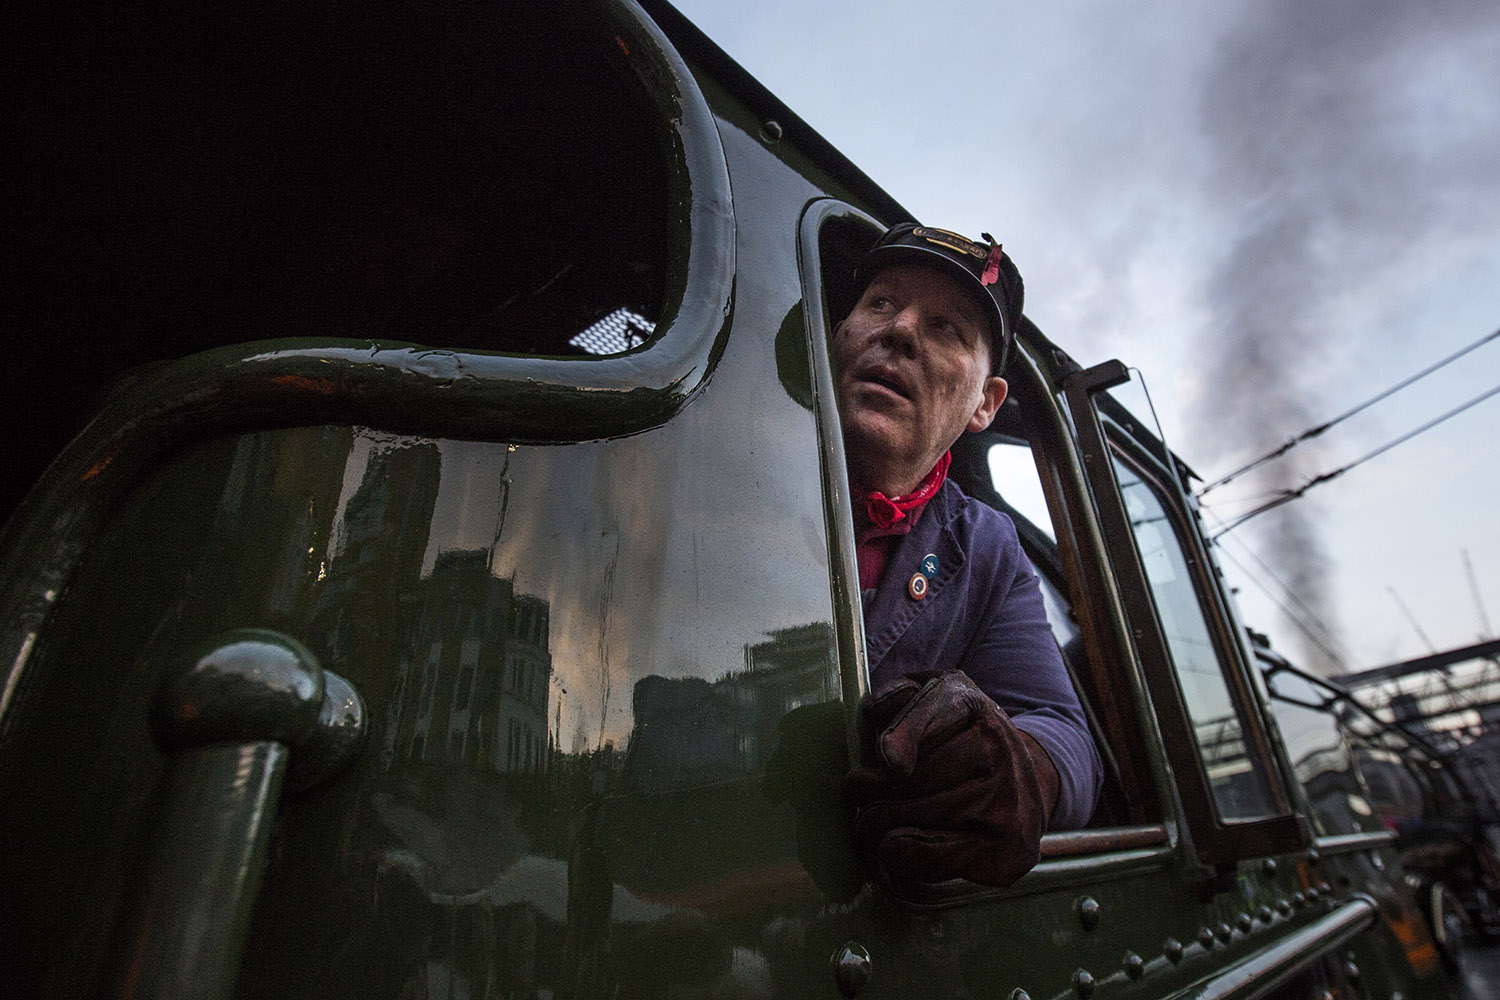 After Years Of Turmoil, A Legendary Steam Engine Rolls Again 